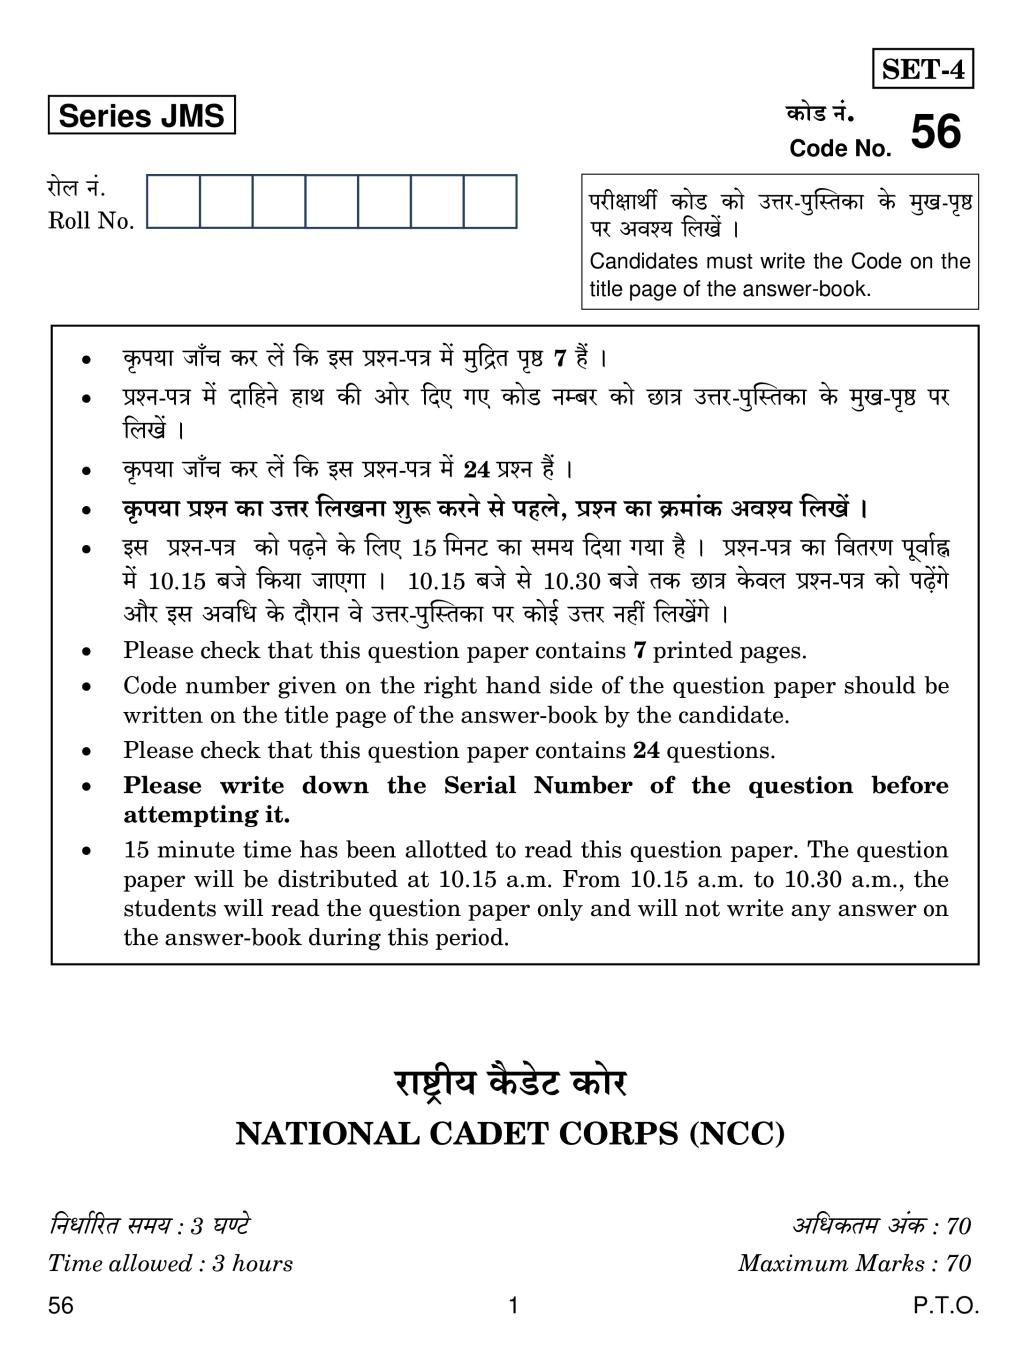 CBSE Class 10 National Cadet Corps Question Paper 2019 - Page 1